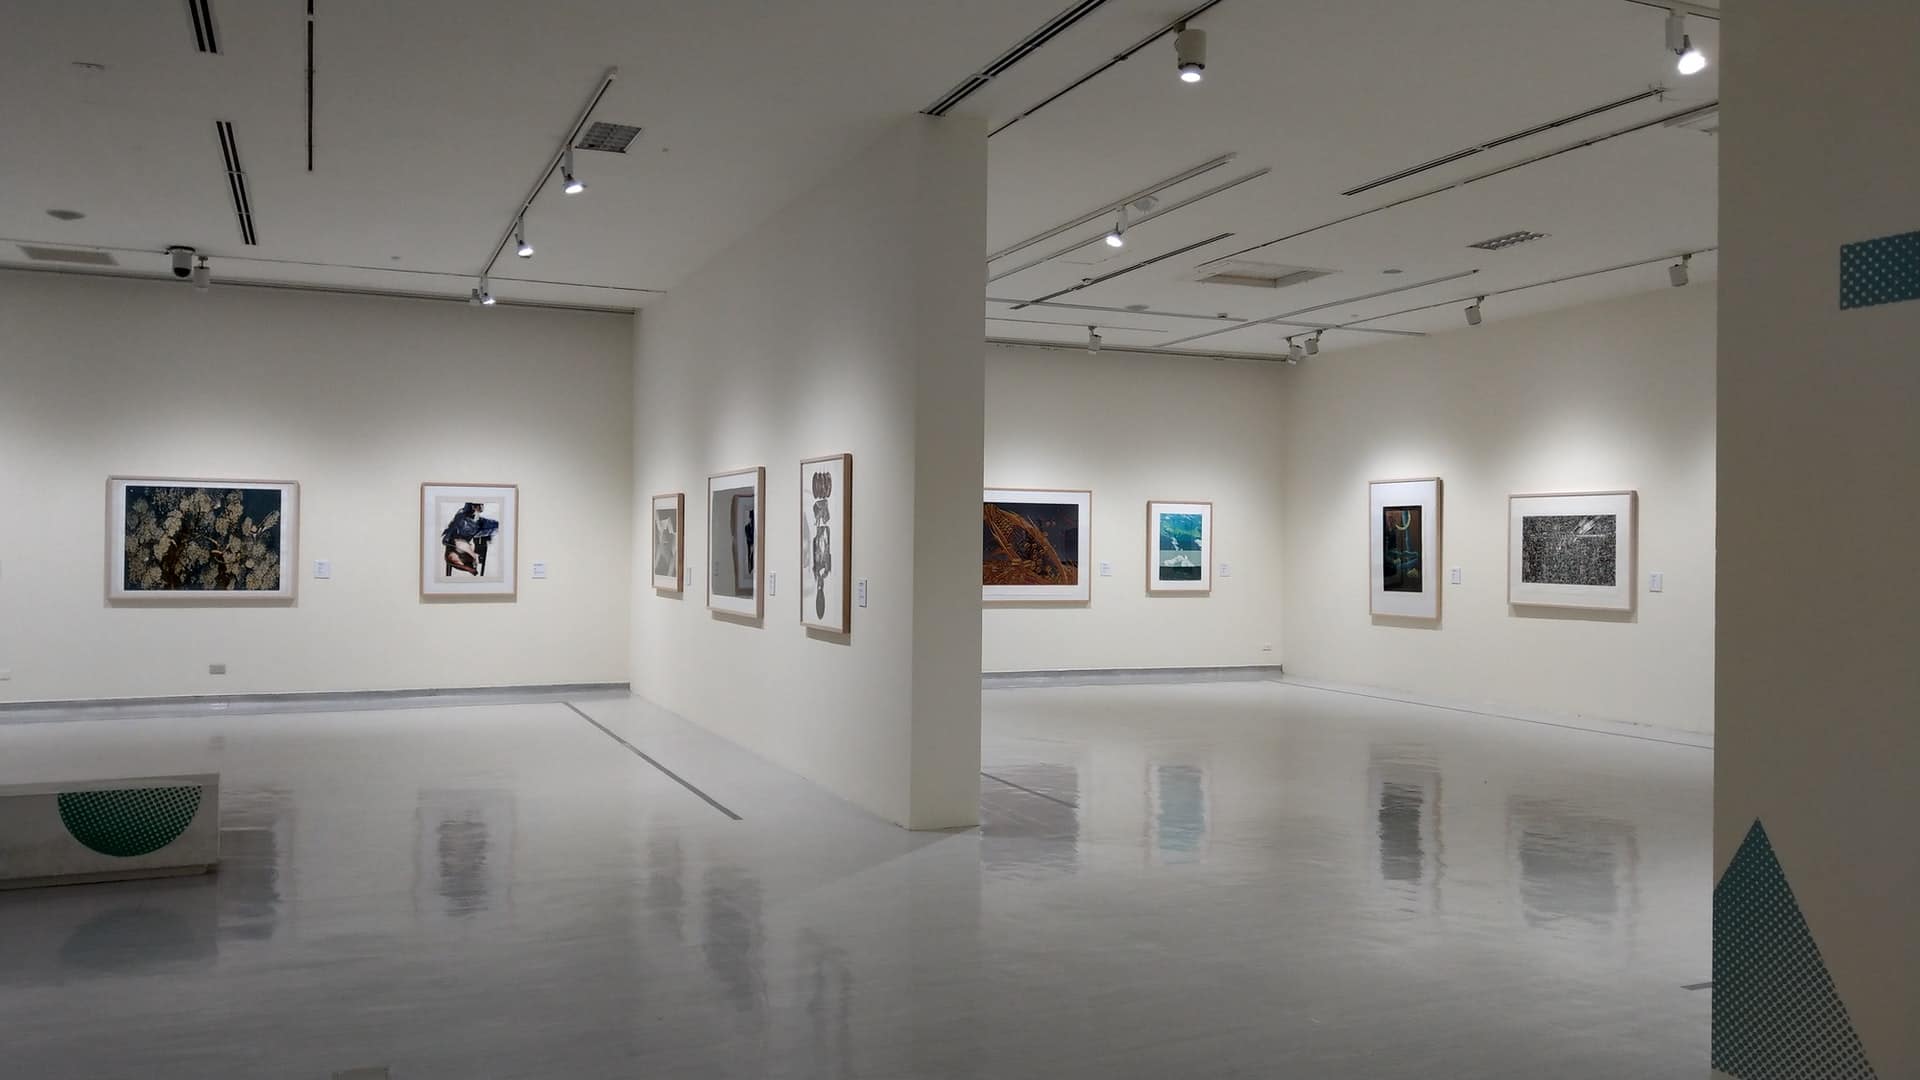 Paintings in a gallery representing an estate dispute over the trustee's handling of art owned by the estate and other expenses